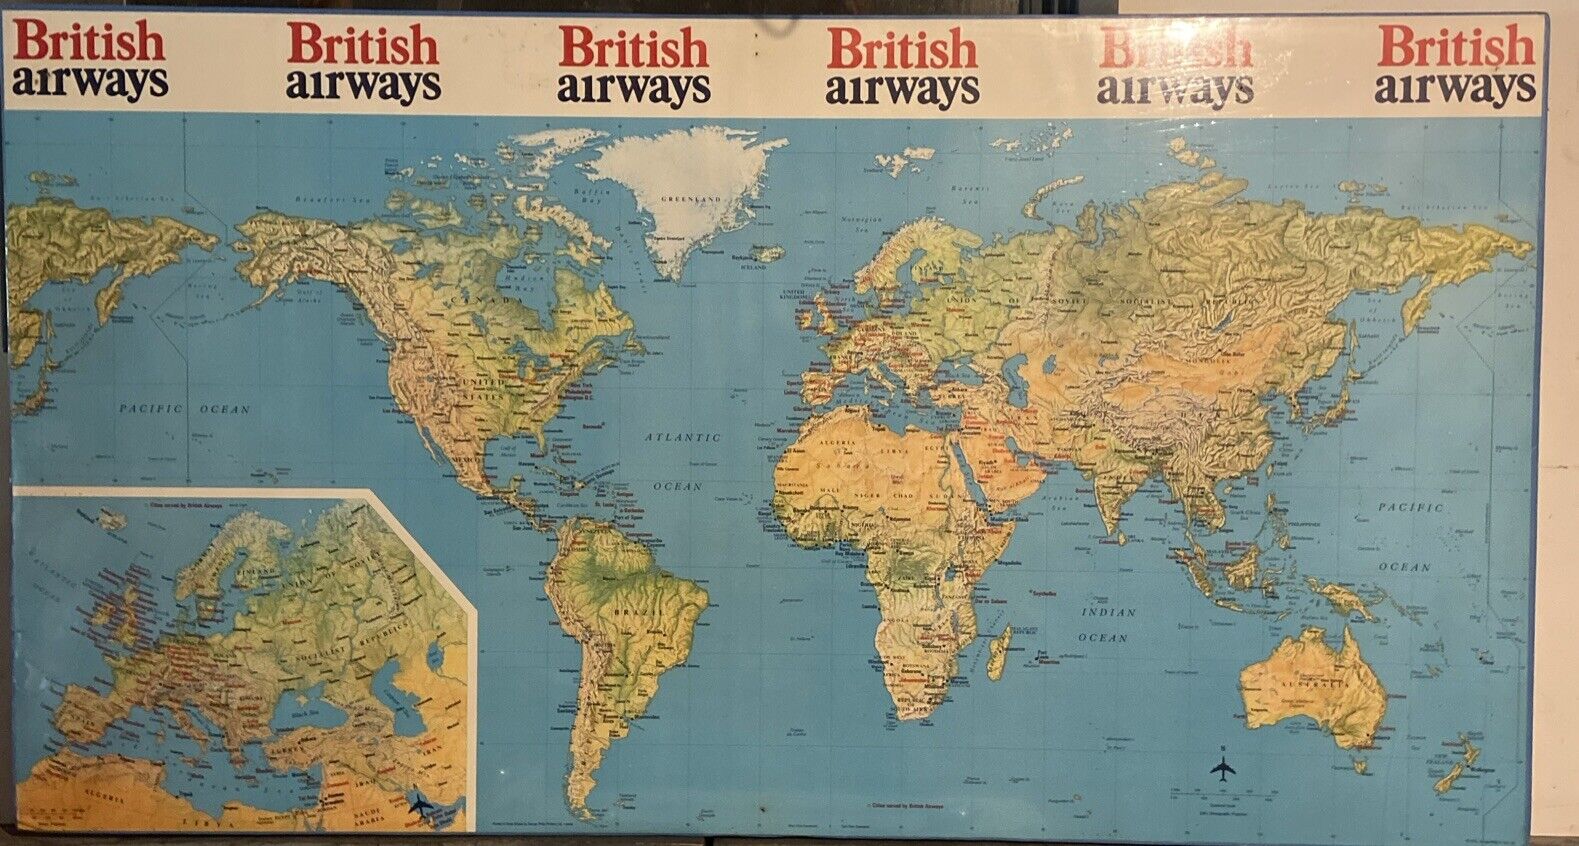 Vintage Colour 1975 British Airways Large World Wall Map Poster 57”x31”